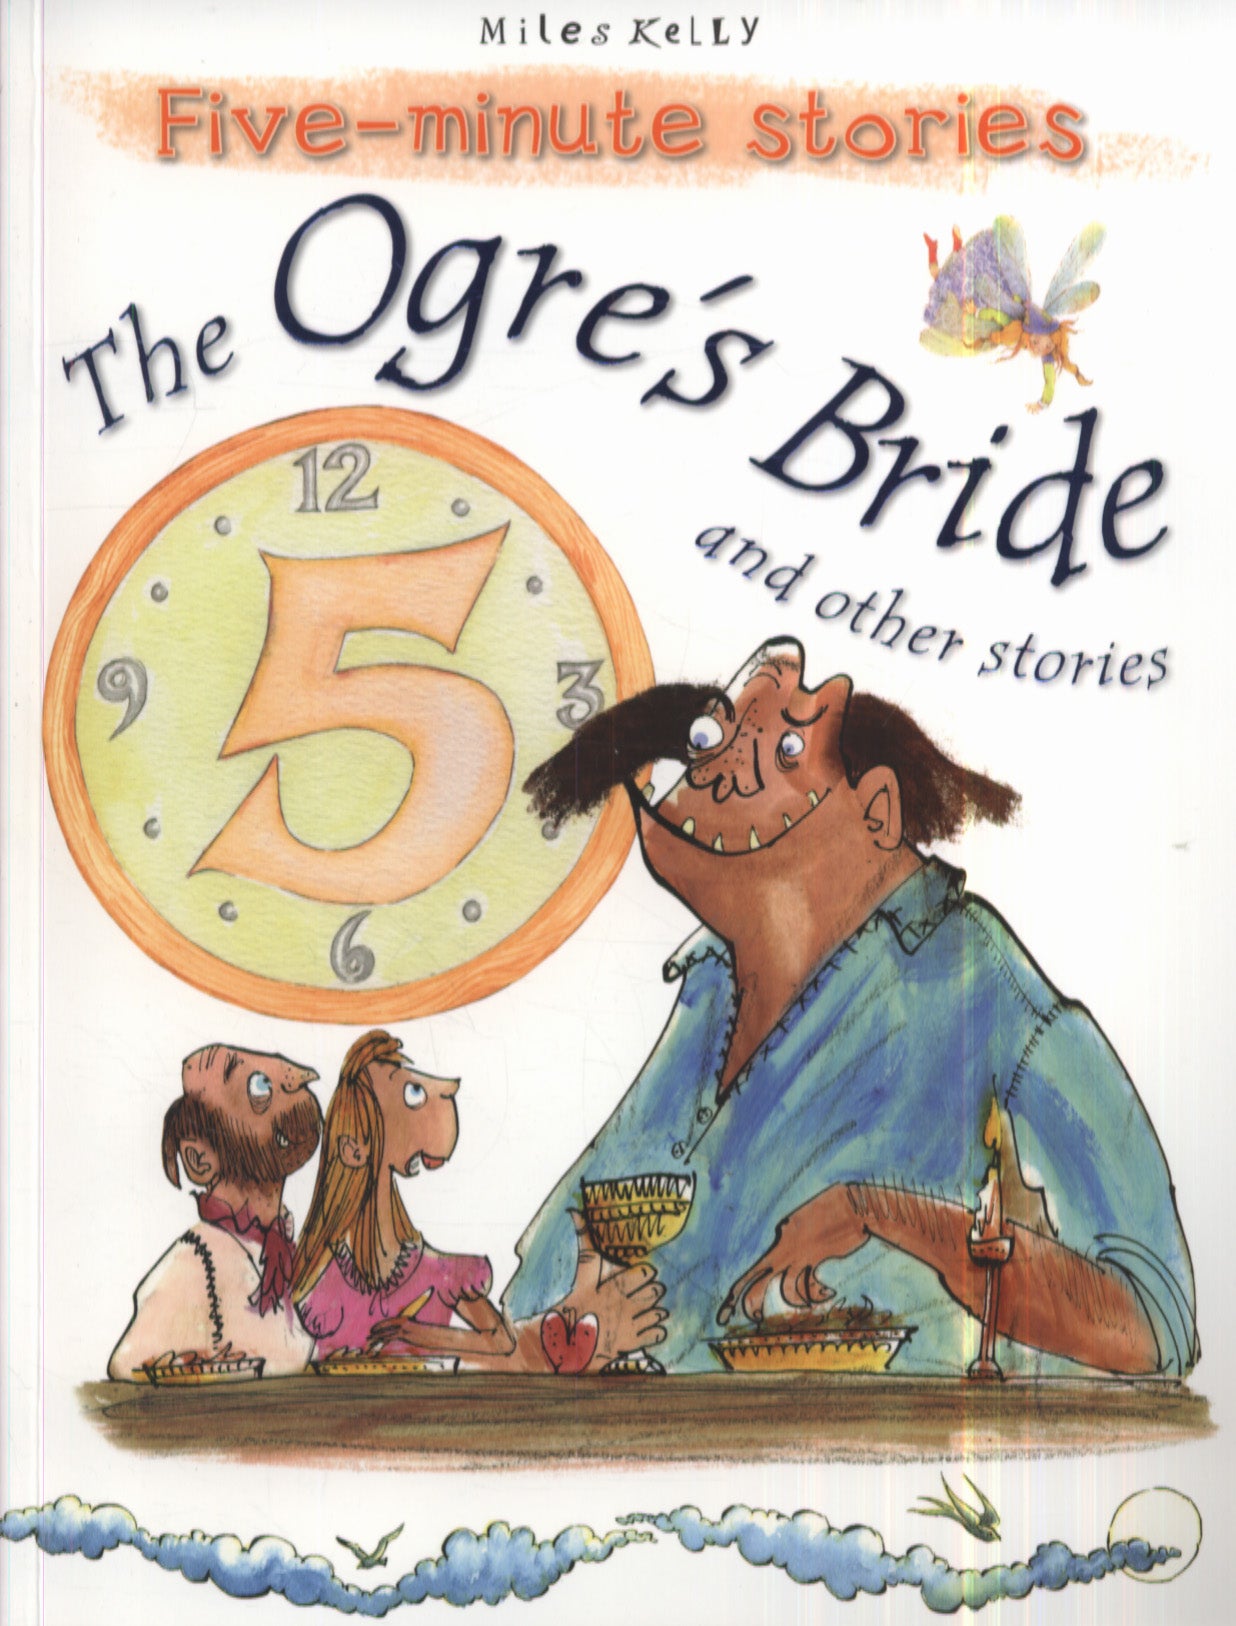 The Ogre's Bride and other stories (5 Minute Children's Stories)